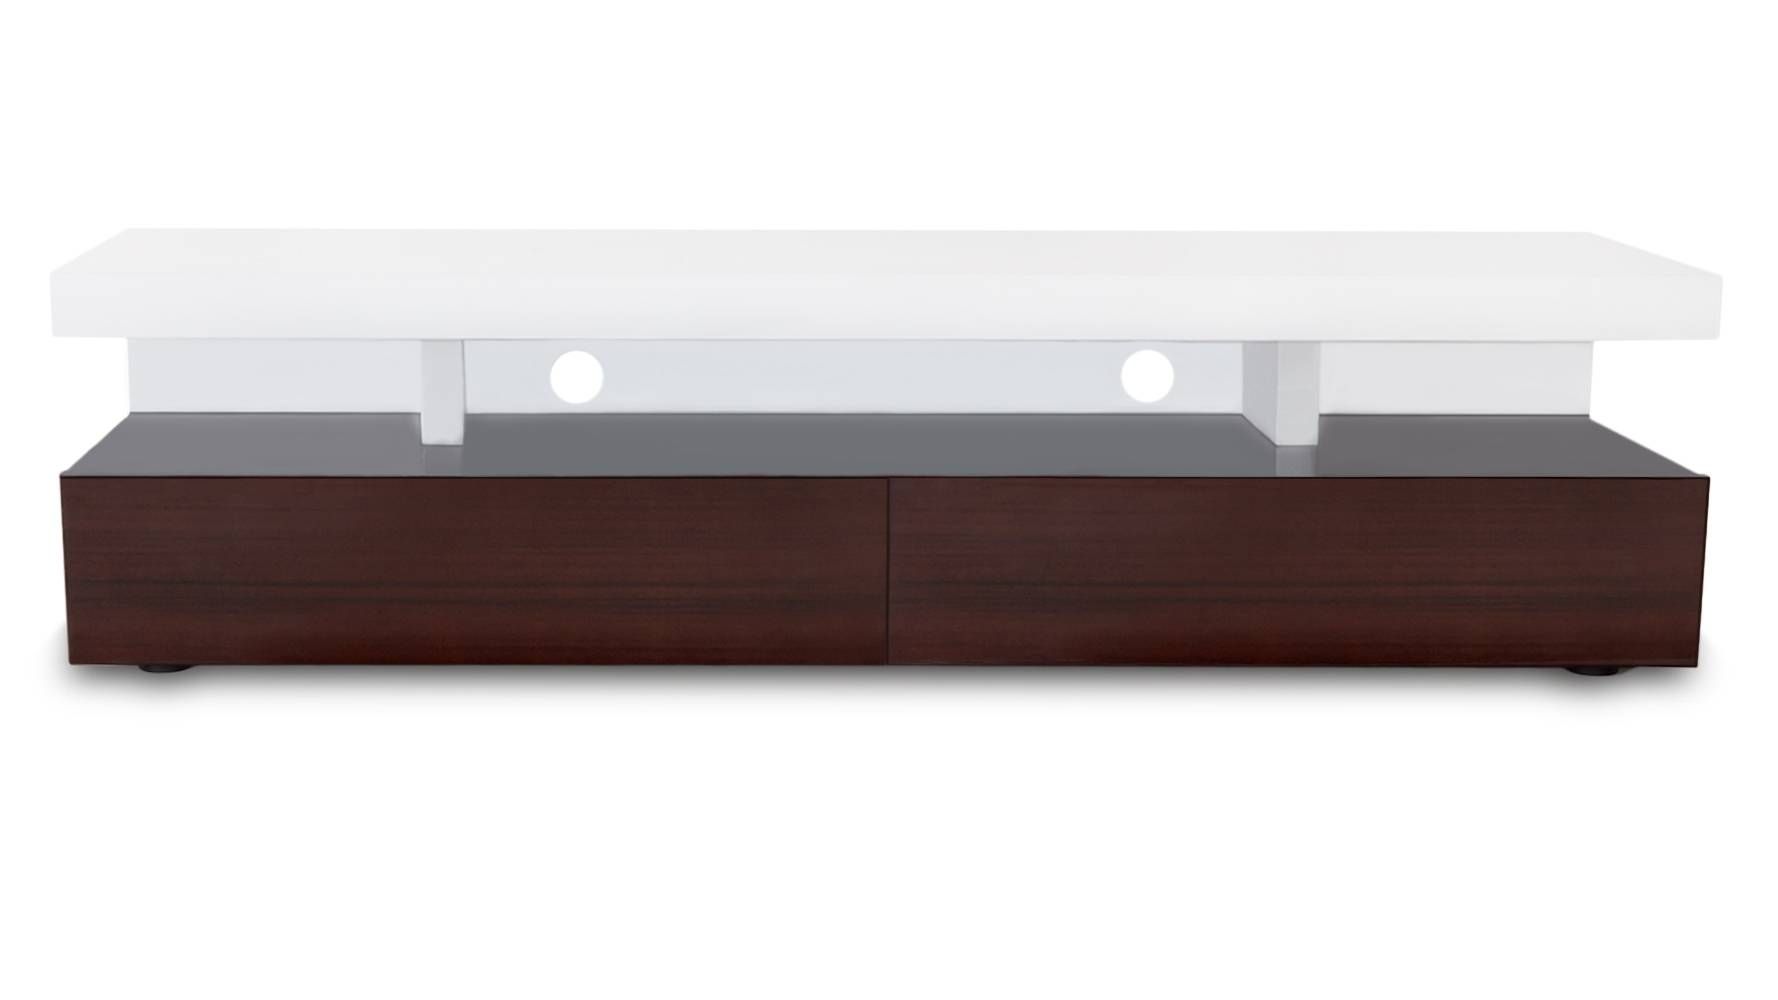 Mcintosh High Gloss Coffee Table With Storage – White Square In Tv Stand Coffee Table Sets (View 7 of 30)